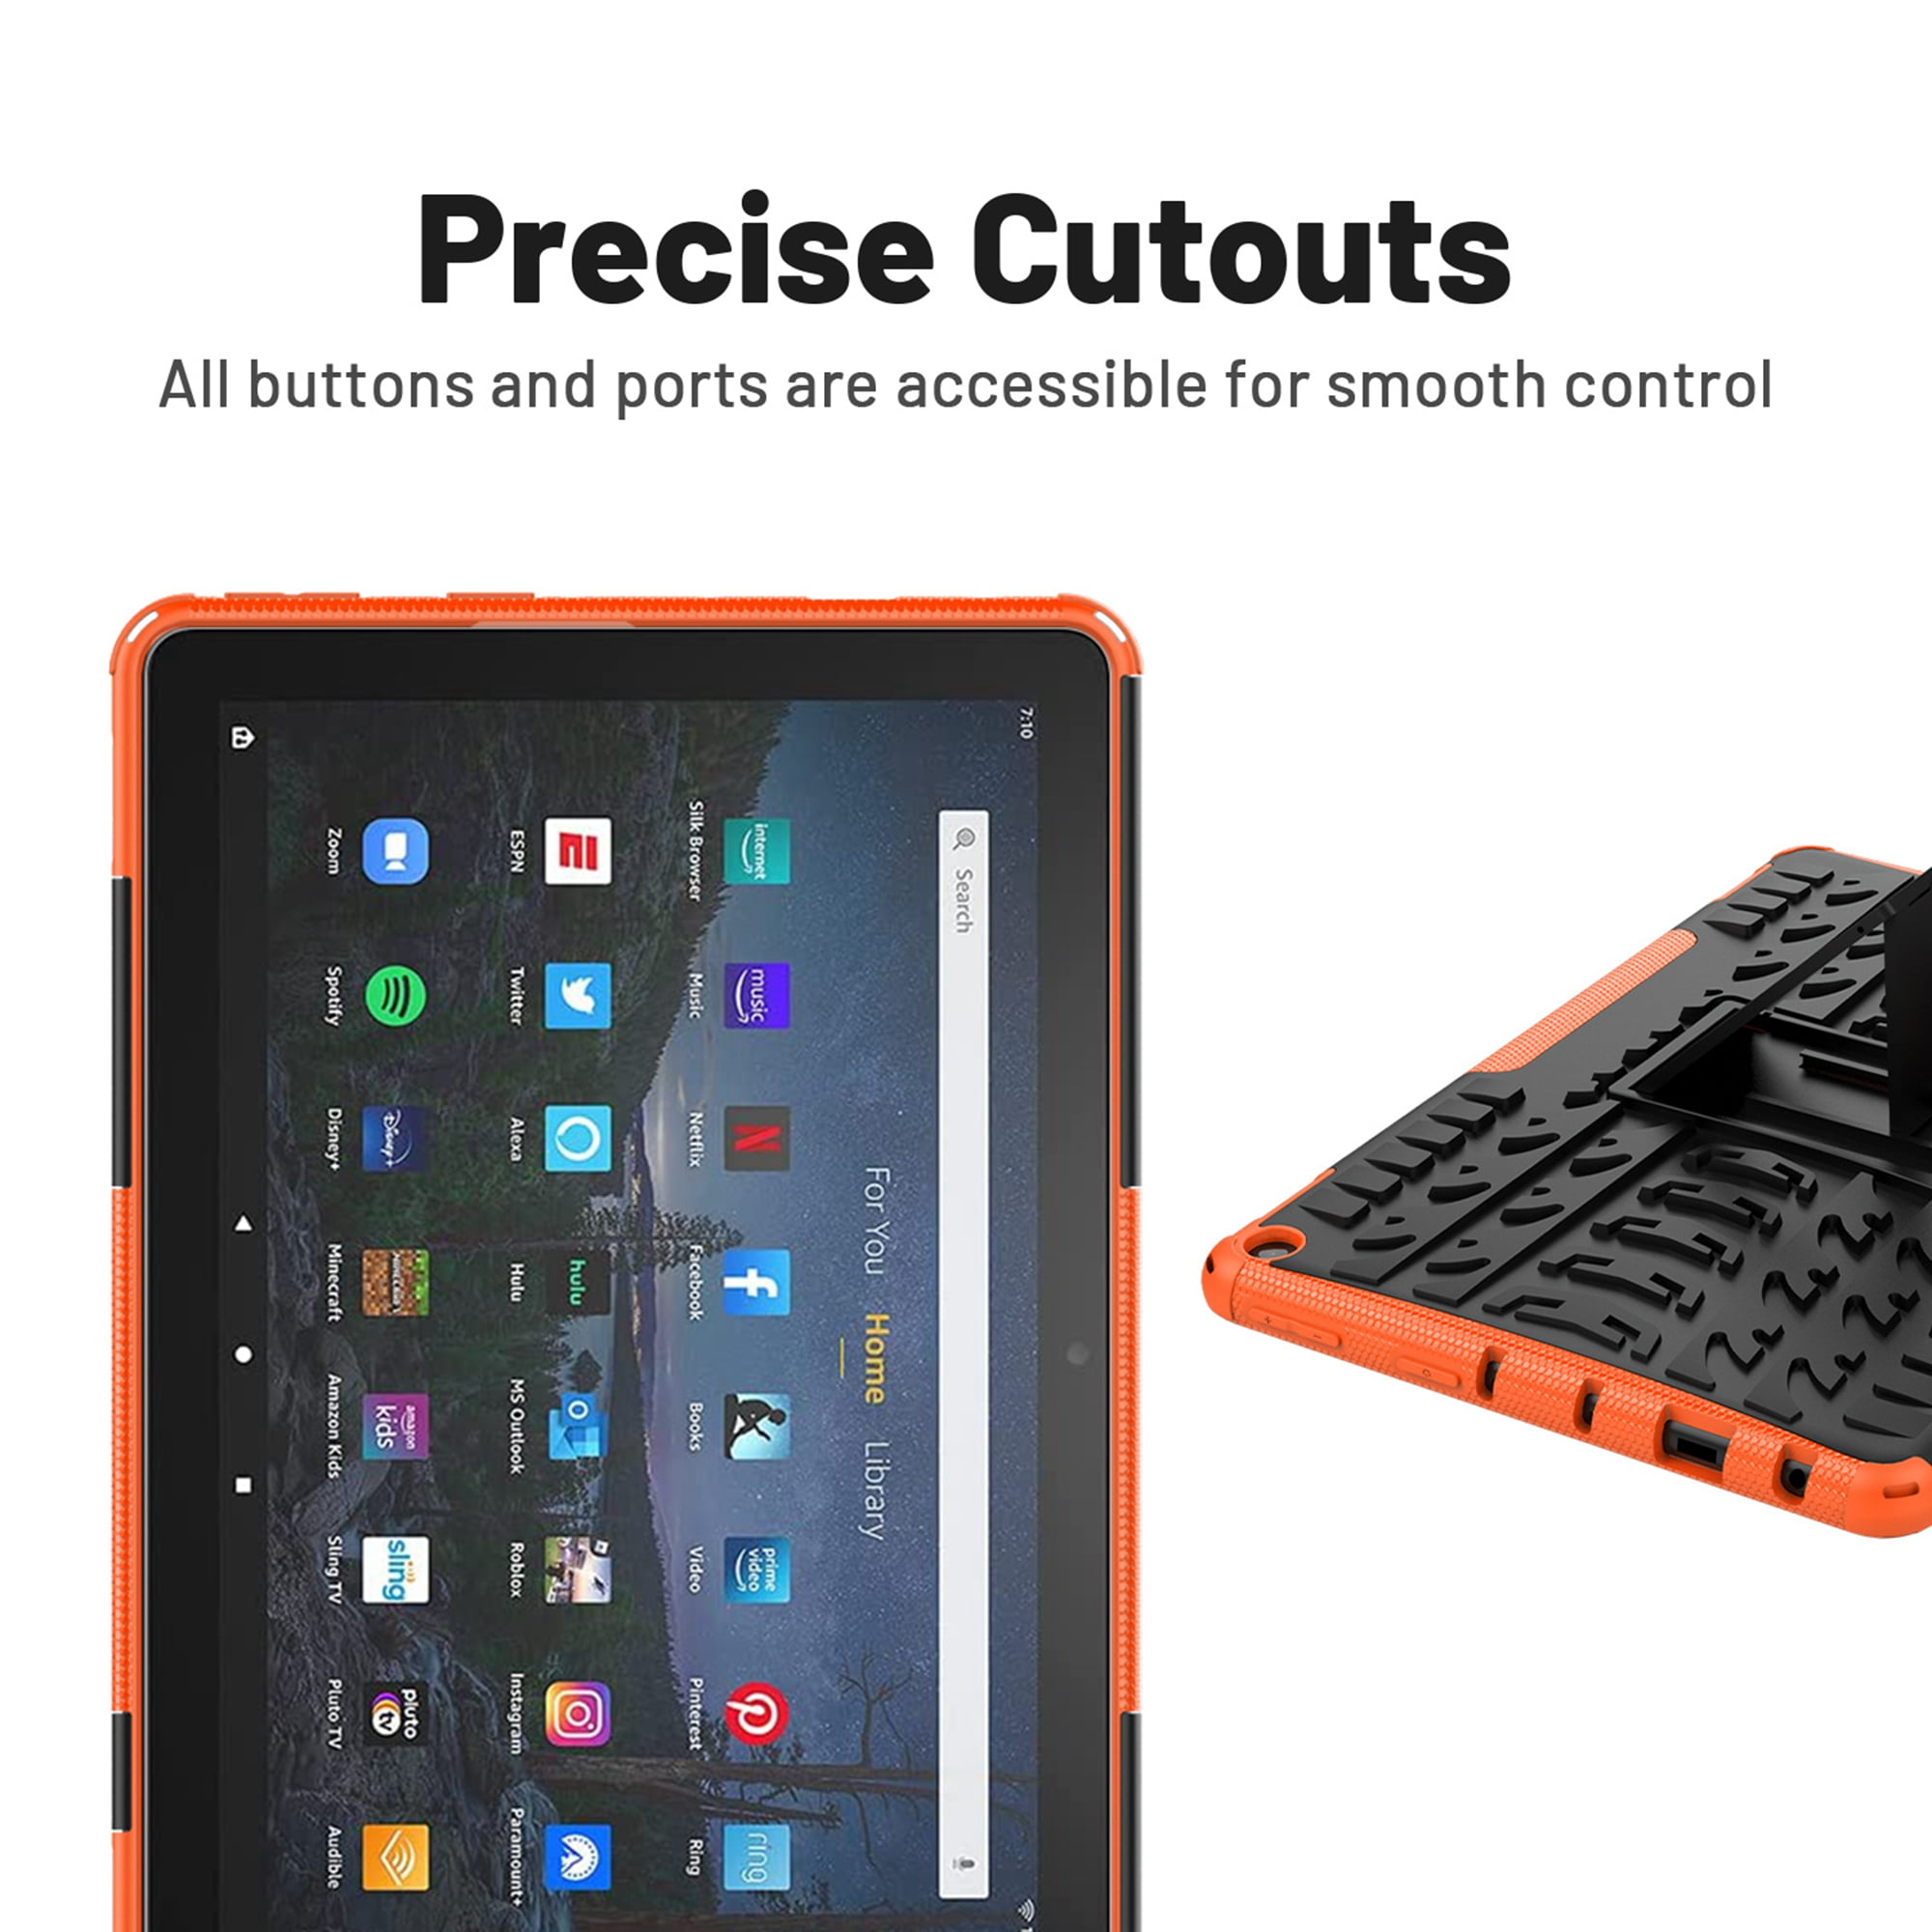 Dual Layer Heavy Duty Shockproof Impact Resistance Protective Kickstand Case Compatible with Fire 10 Case &10 Plus 11th Generation Not for Lenovo ROISKIN for F i r e hd 10 Case 10.1 in 2021 Release 